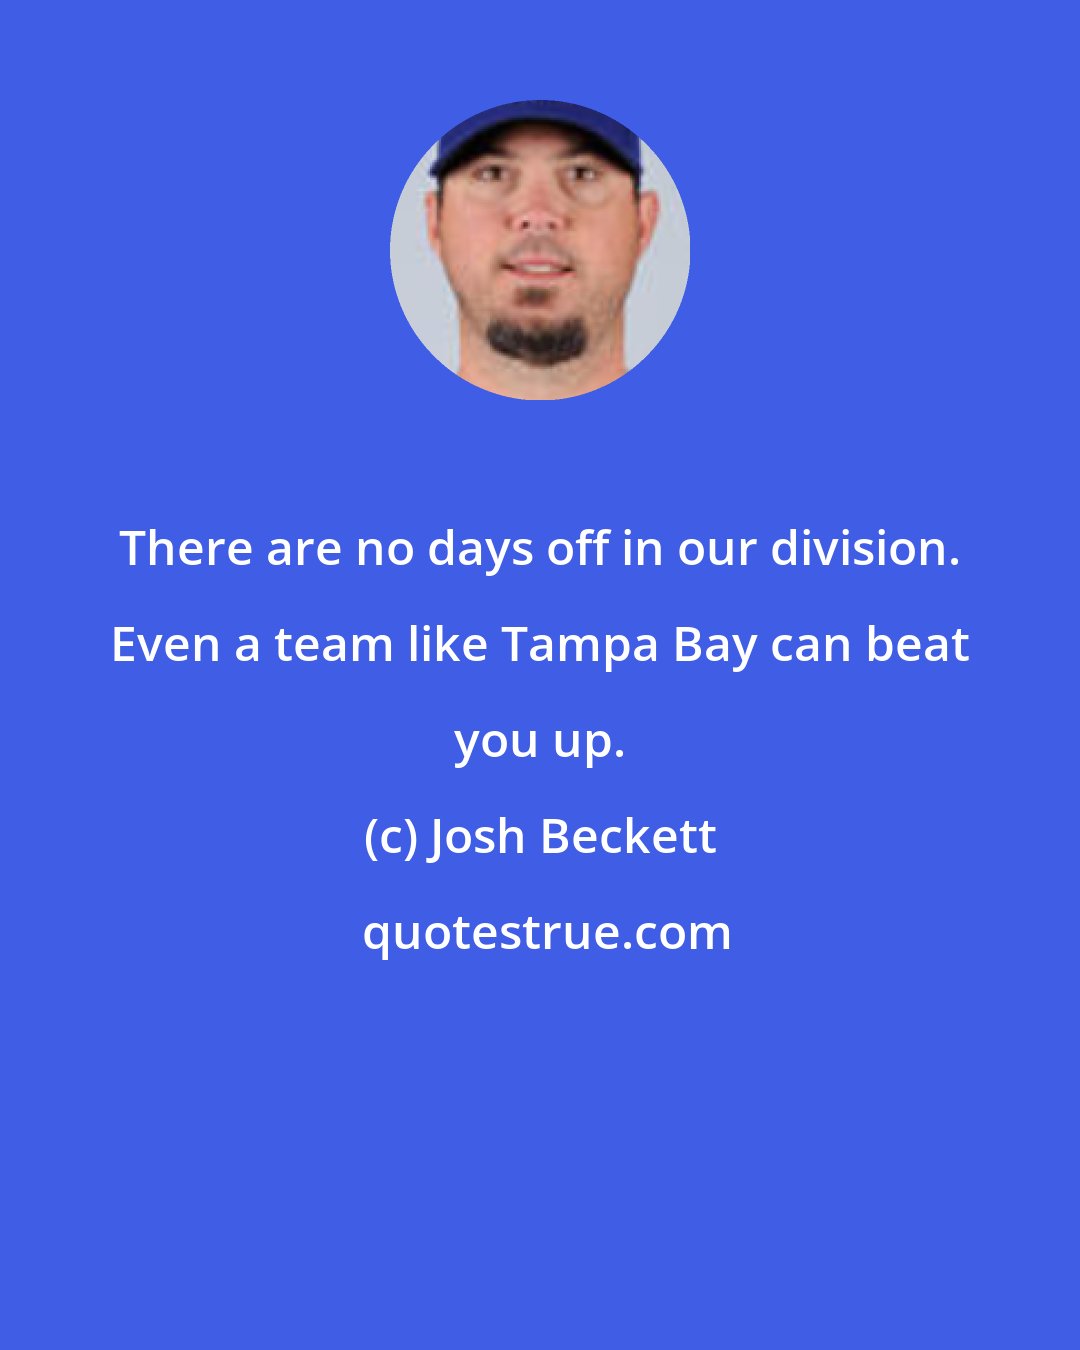 Josh Beckett: There are no days off in our division. Even a team like Tampa Bay can beat you up.